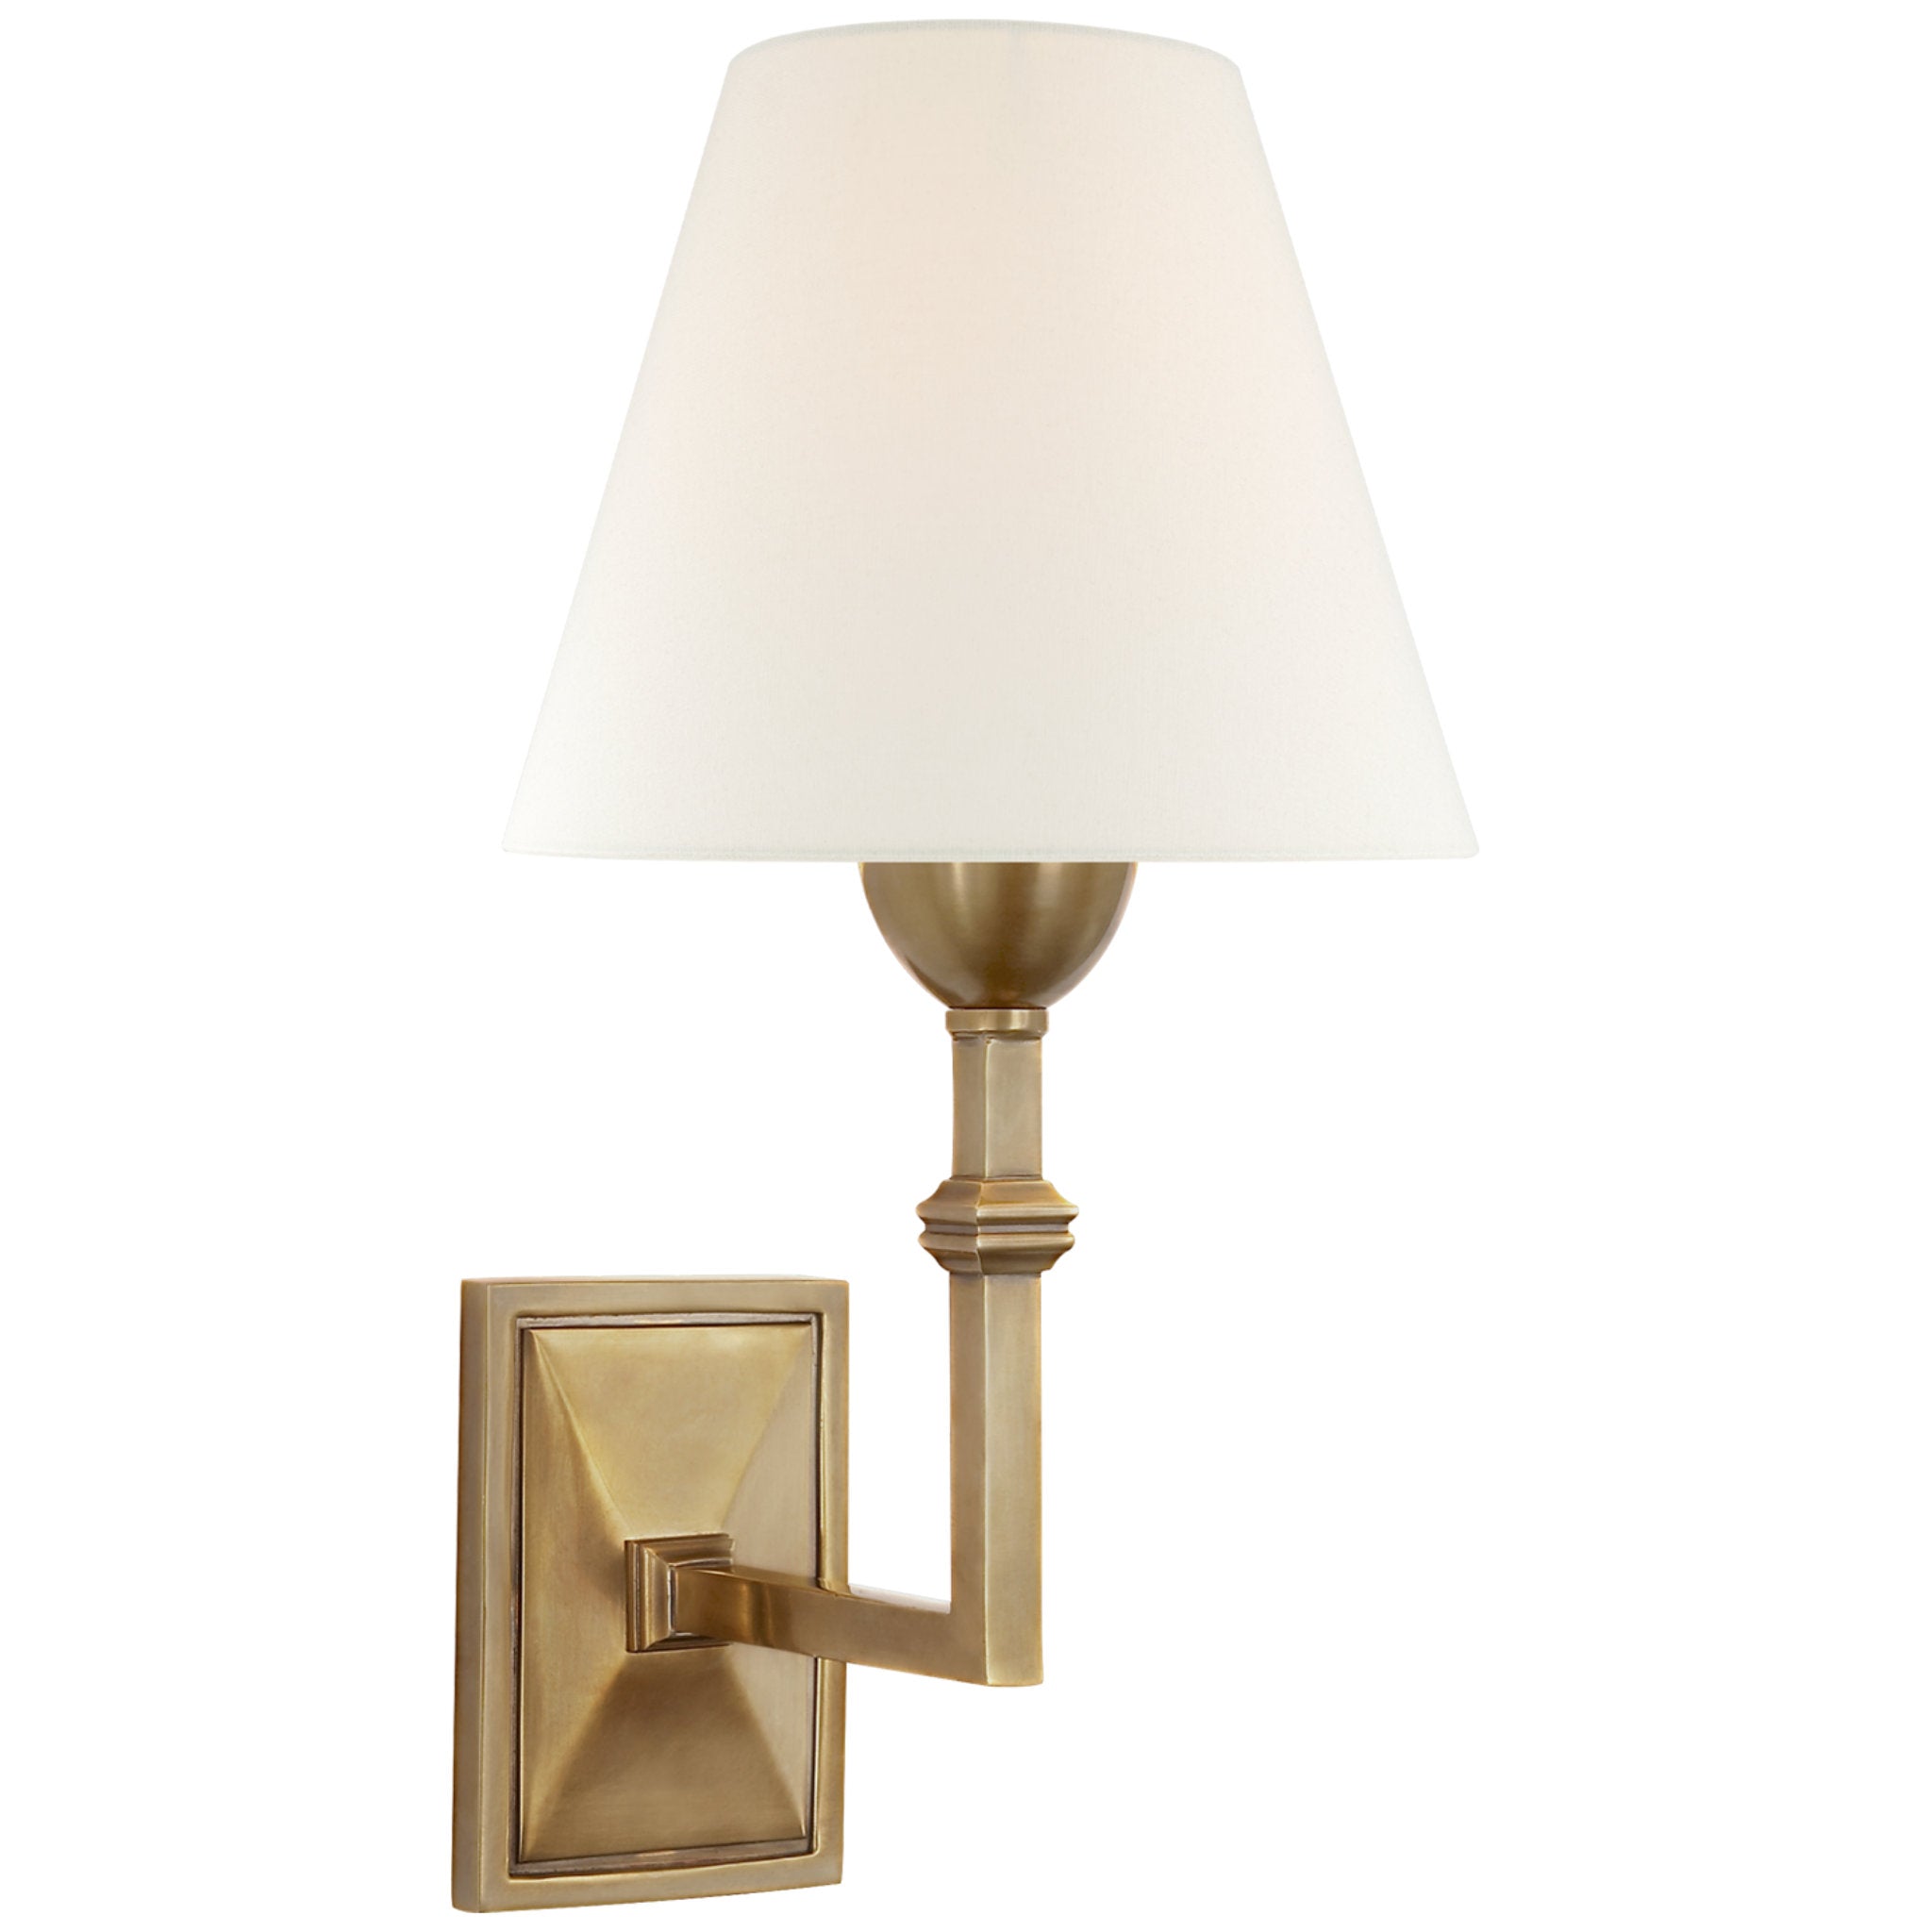 Alexa Hampton Jane Wall Sconce in Hand-Rubbed Antique Brass with Linen Shade